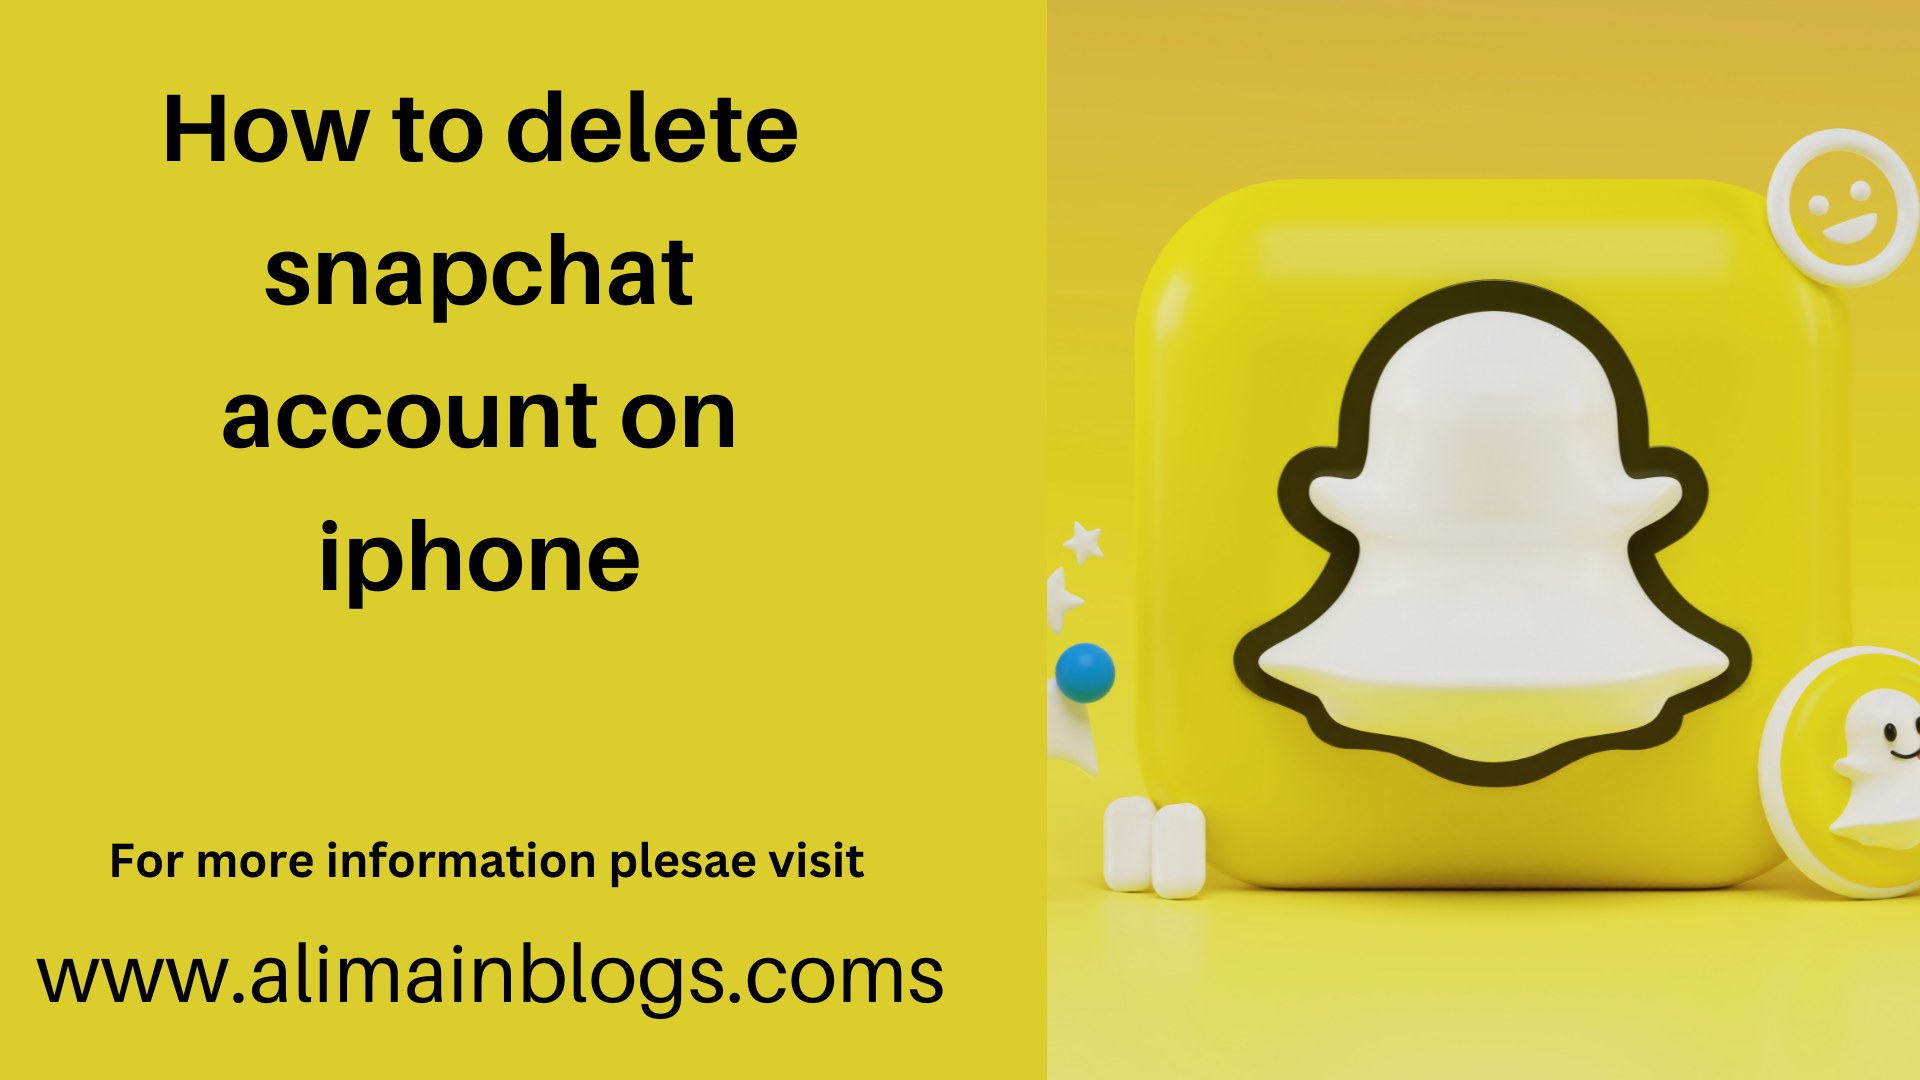 How to delete snapchat account on iphone